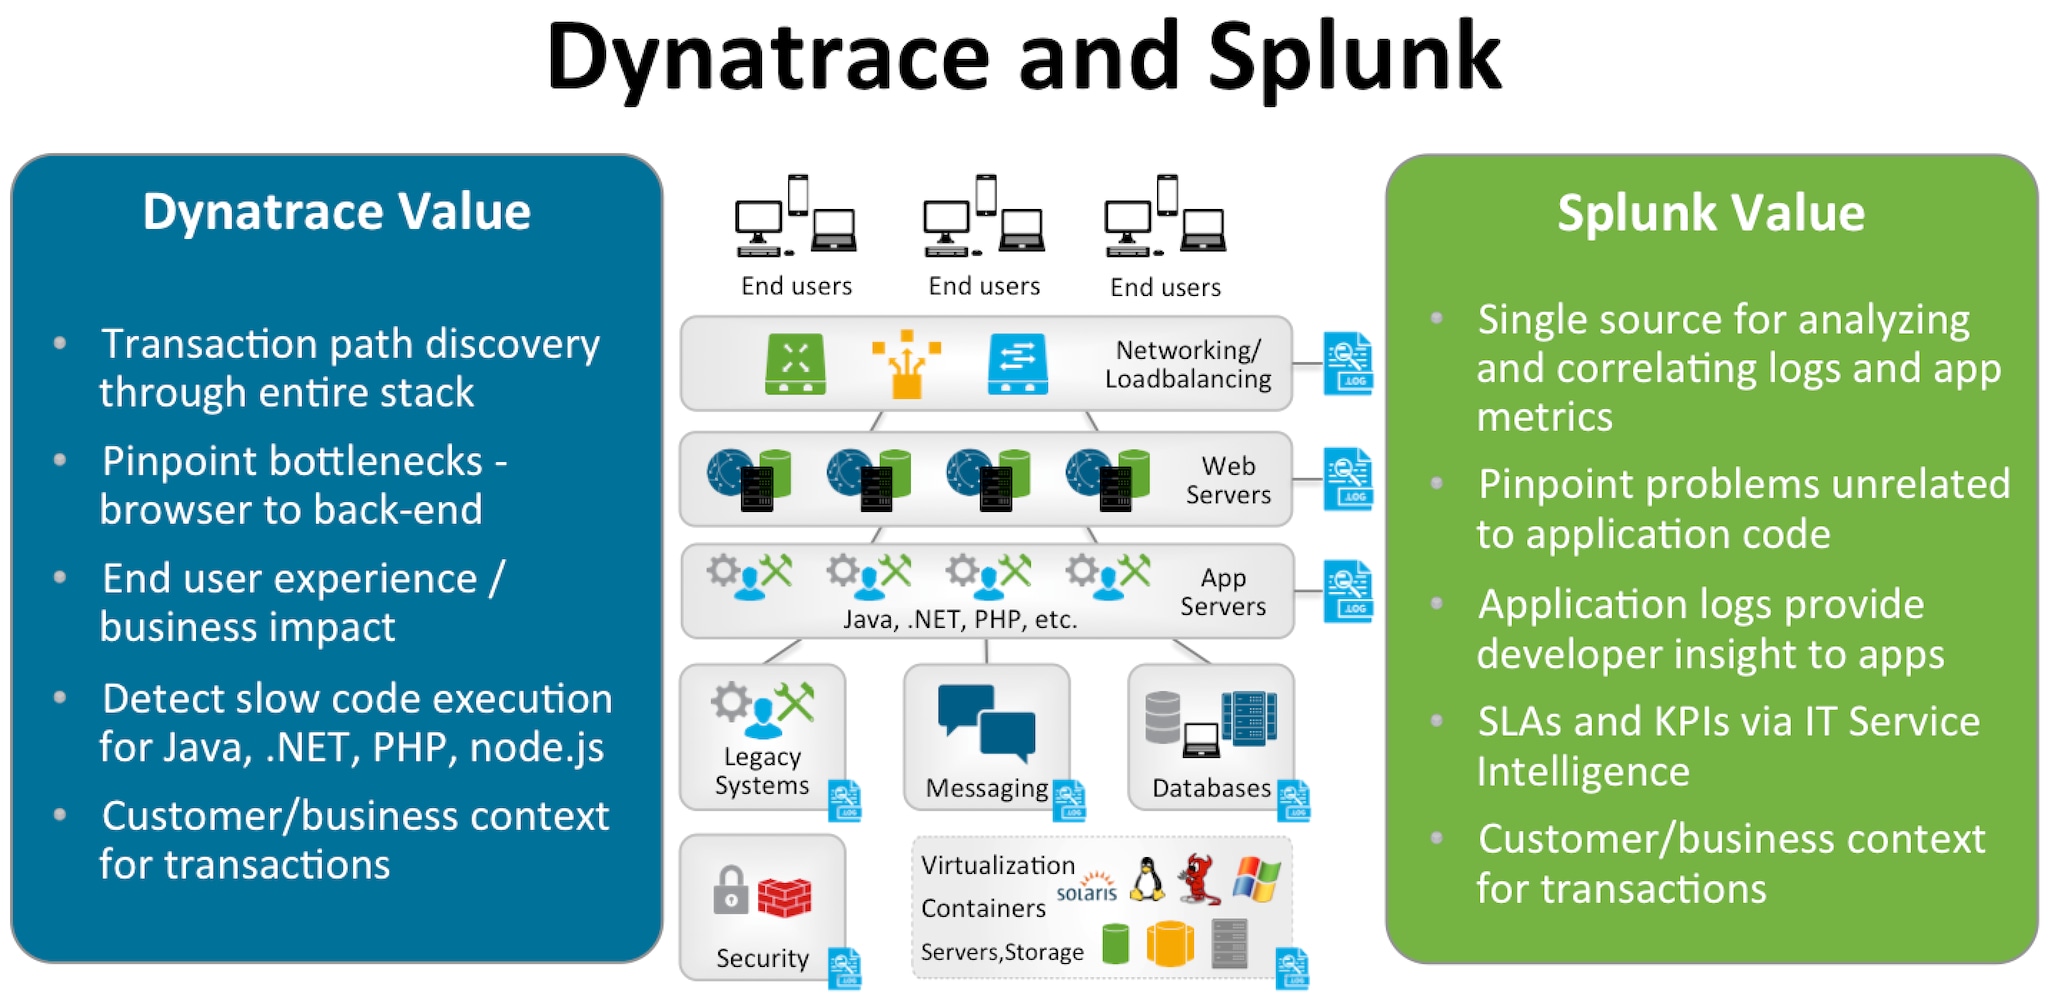 Bringing Dynatrace and Splunk together provides a complete view of your applications.